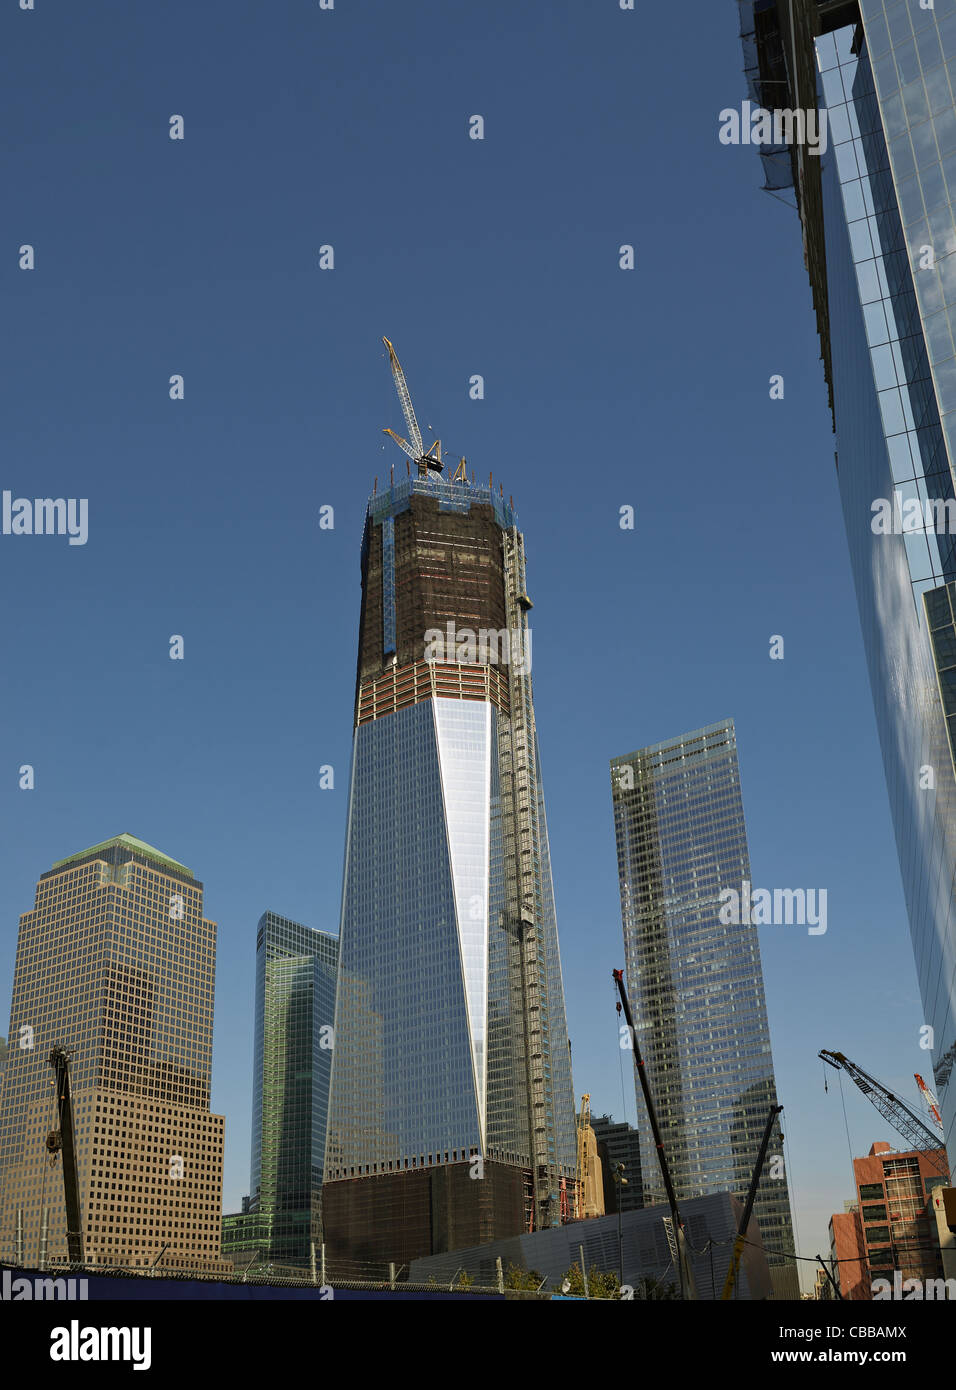 Freedom Tower, or Tower One, at Ground Zero, World Trade Center, New York Stock Photo